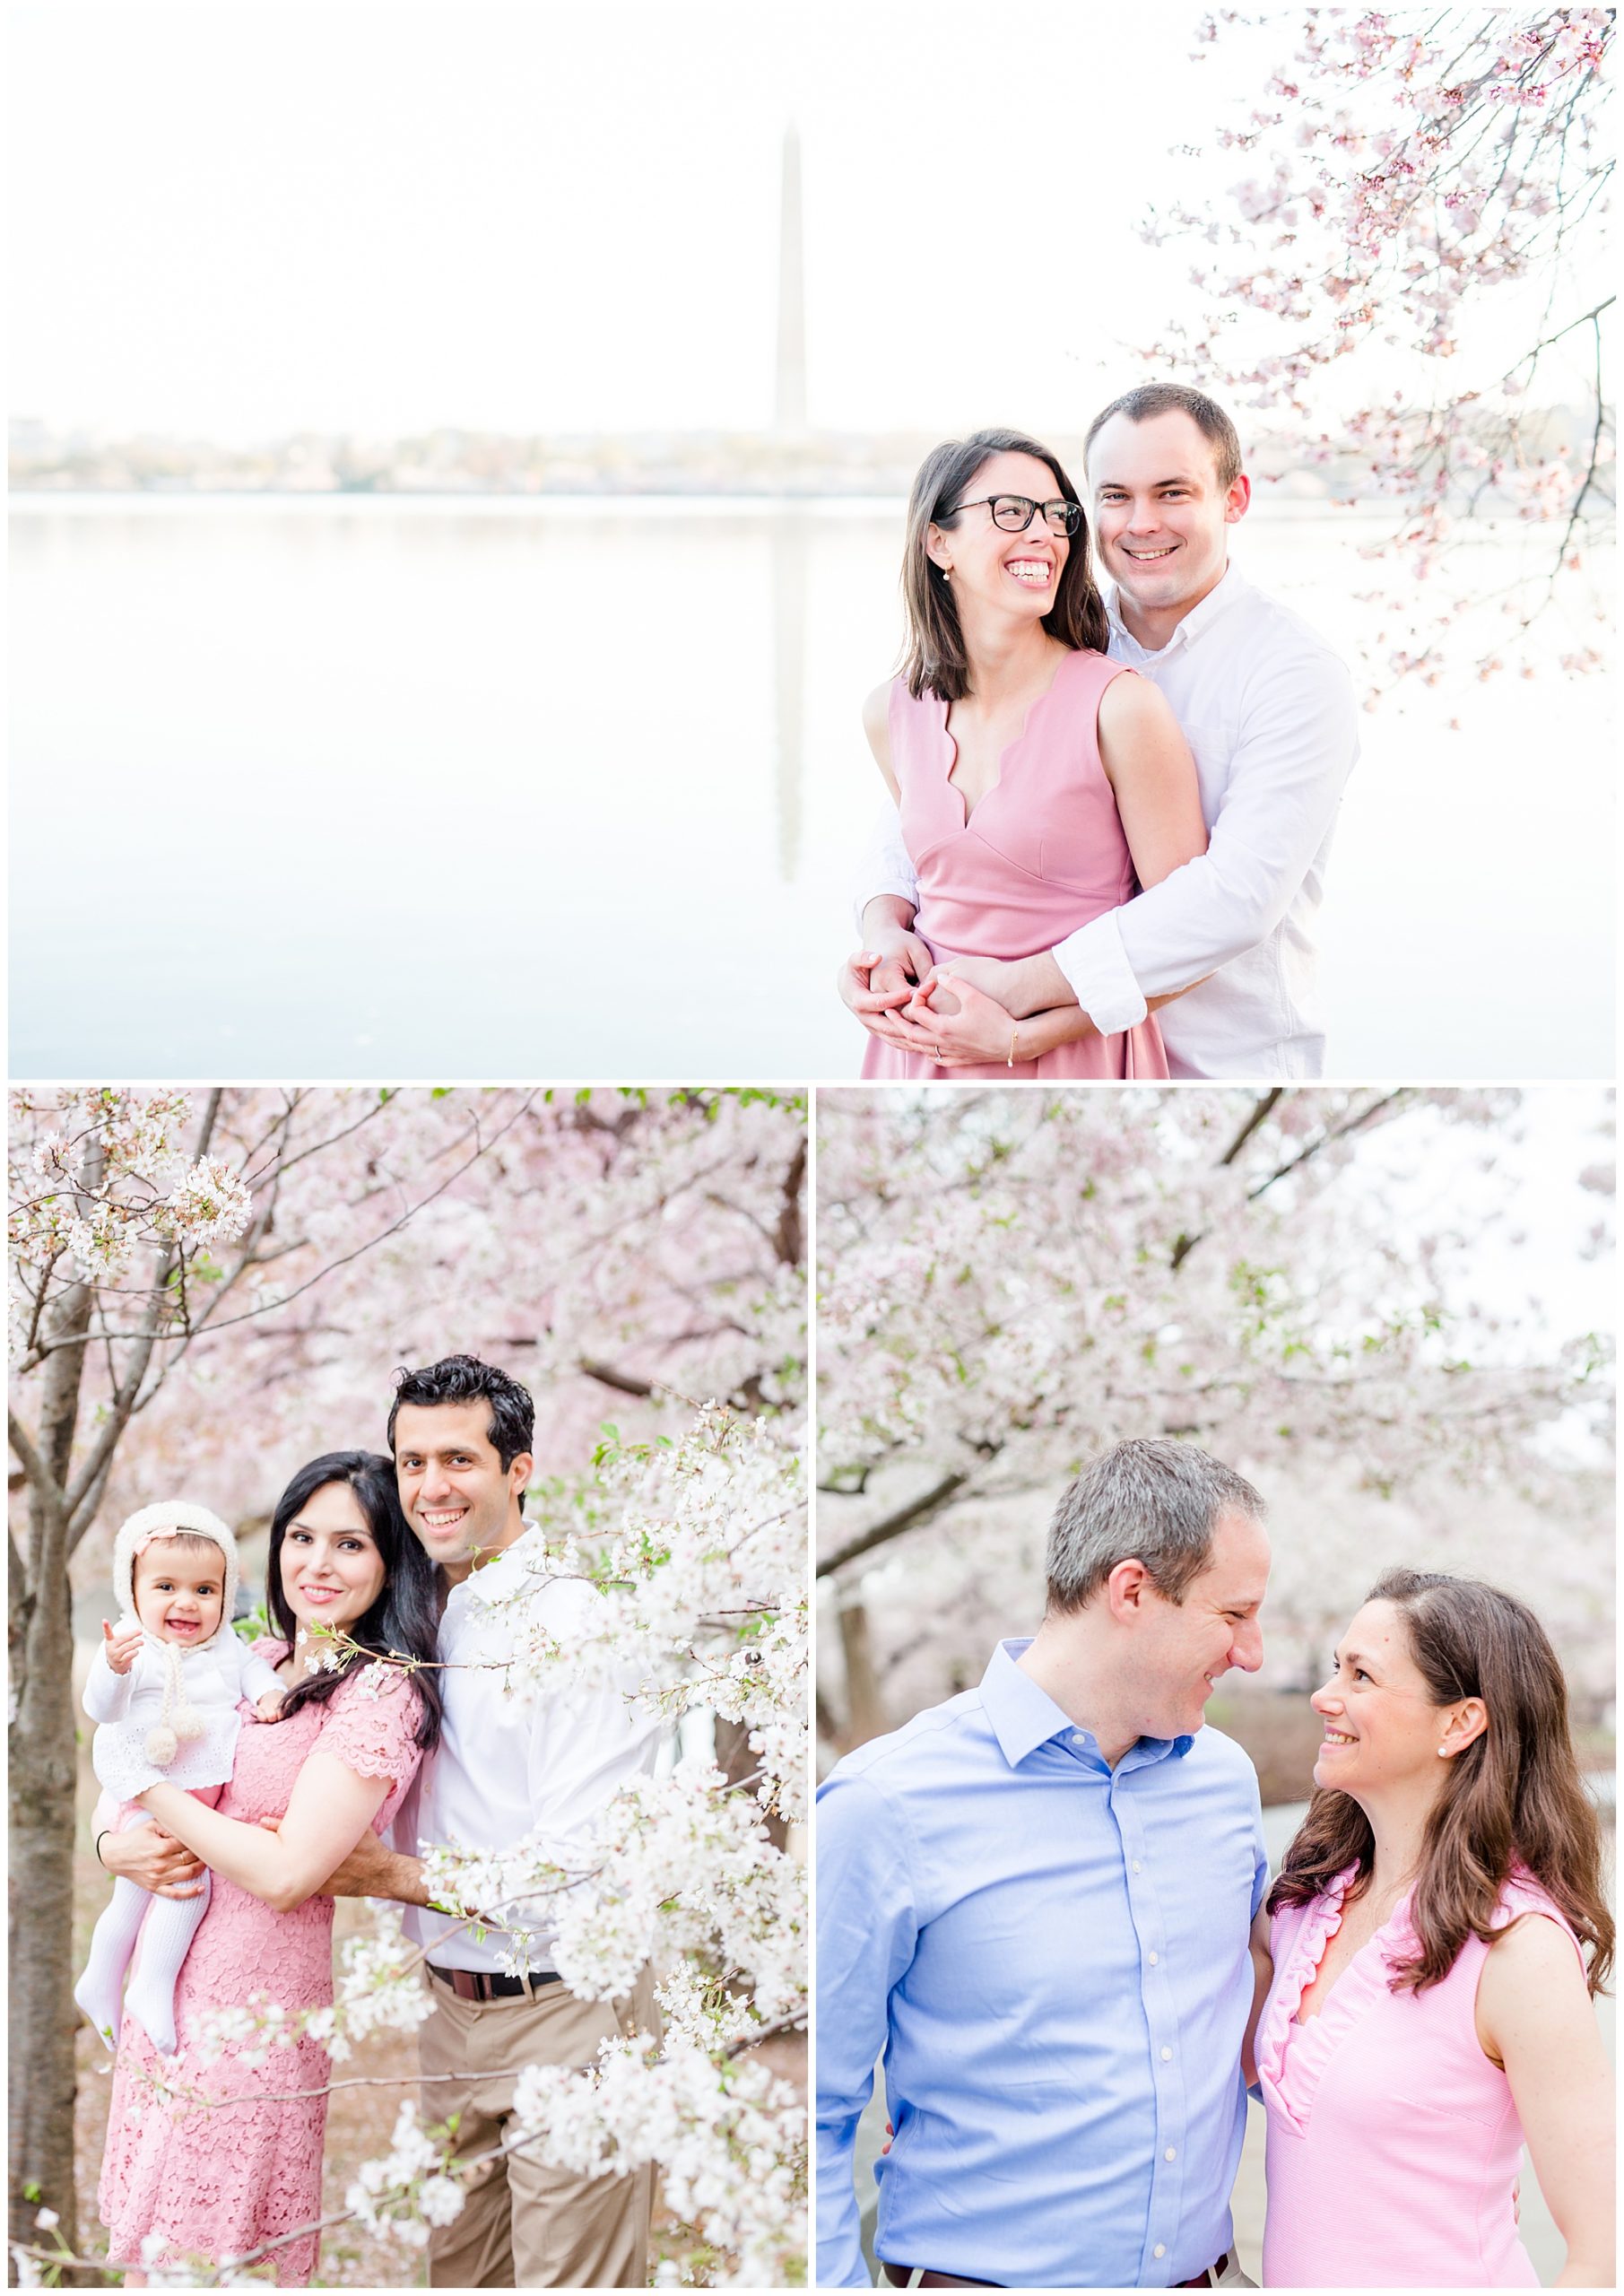 cherry blossoms photo shooot outfit ideas, D.C. cherry blossoms photographer, D.C. cherry blossoms, D.C. tidal basin, D.C. photographer, D.C. engagement photographer, D.C. wedding photographer, Rachel E.H. Photography, spring portraits, photo shoot outfits, spring outfits, family portraits, engagement photos